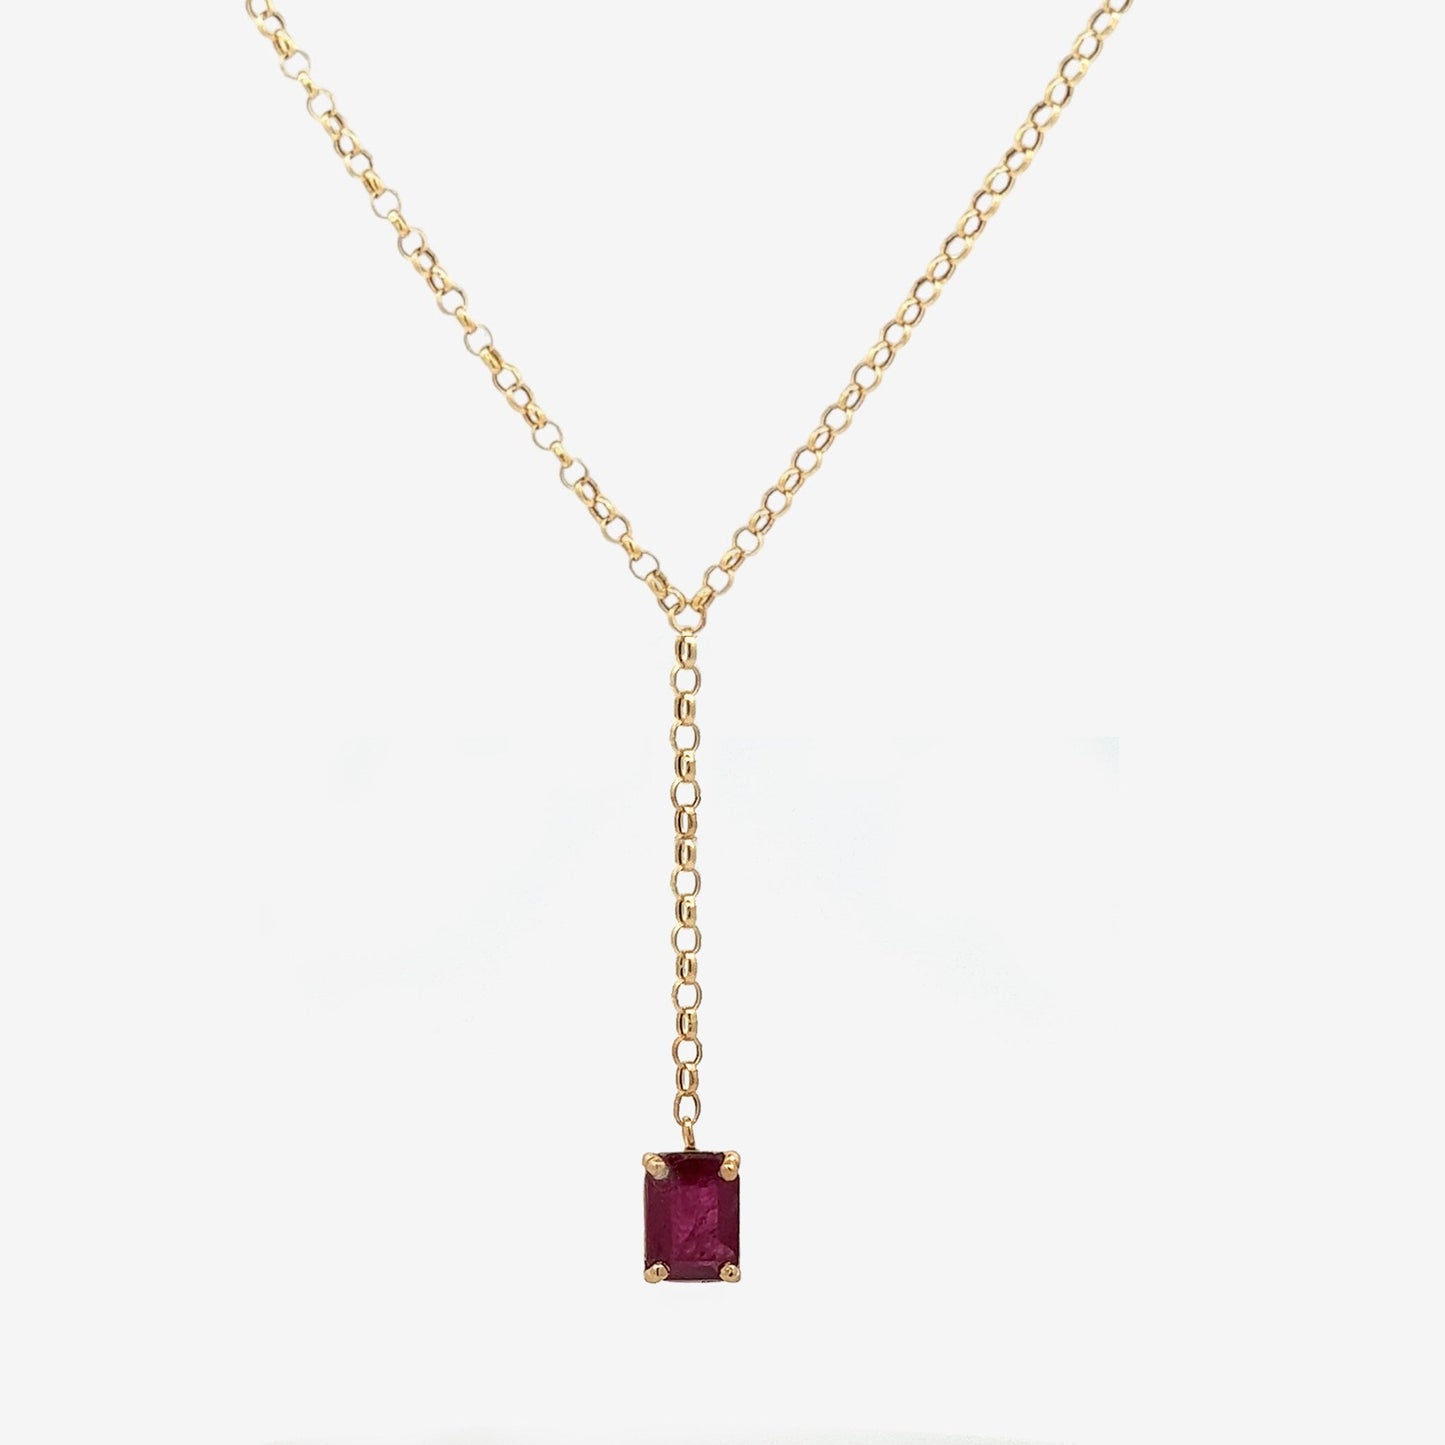 Maris Necklace in Ruby - 18k Gold - Lynor